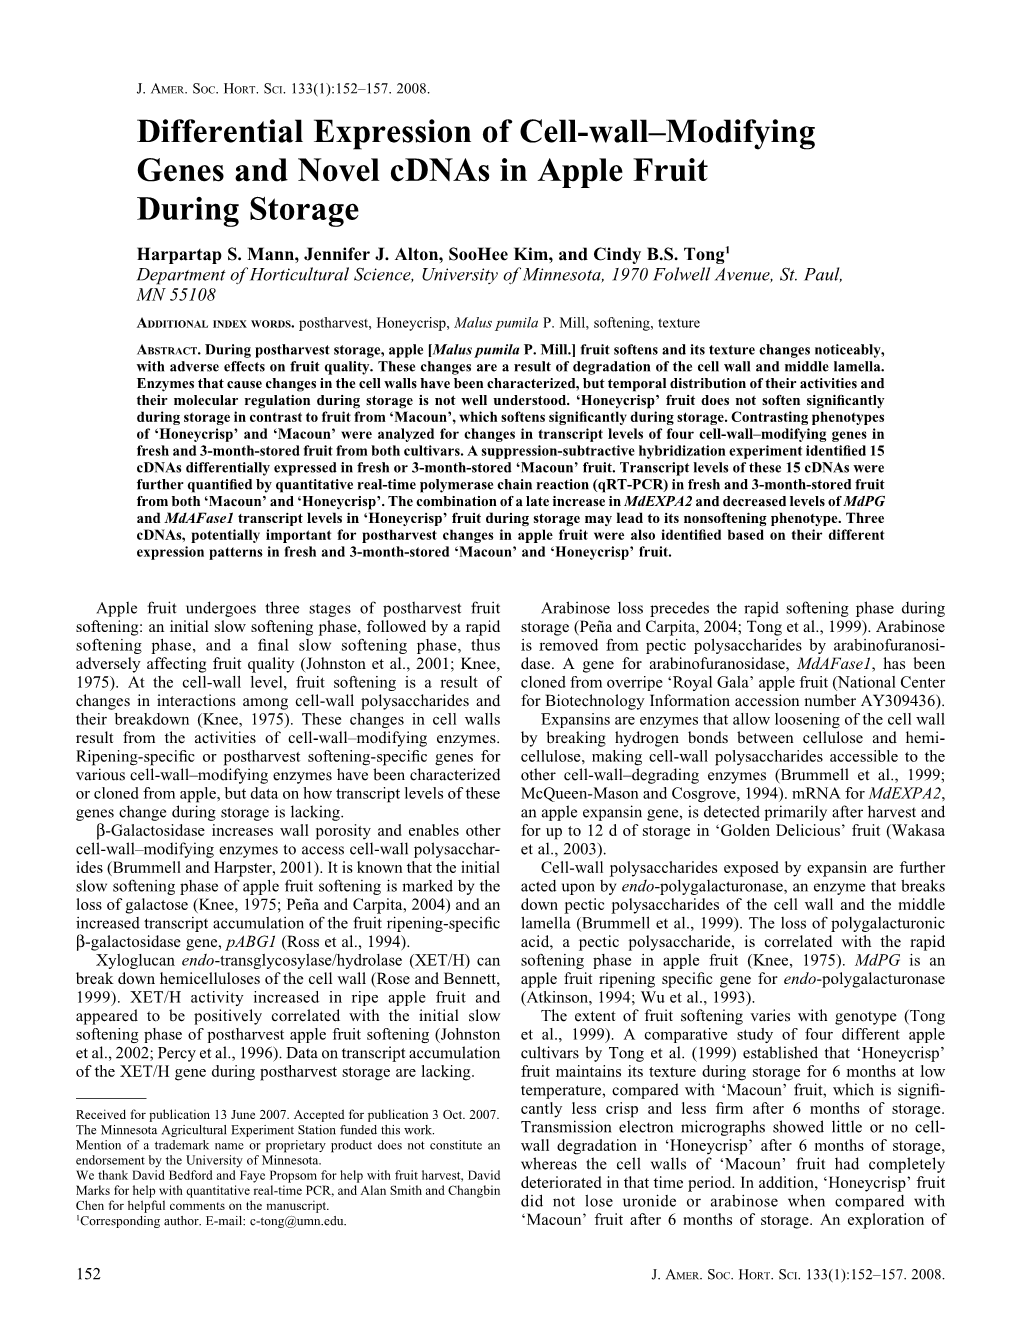 Differential Expression of Cell-Wall–Modifying Genes and Novel Cdnas in Apple Fruit During Storage